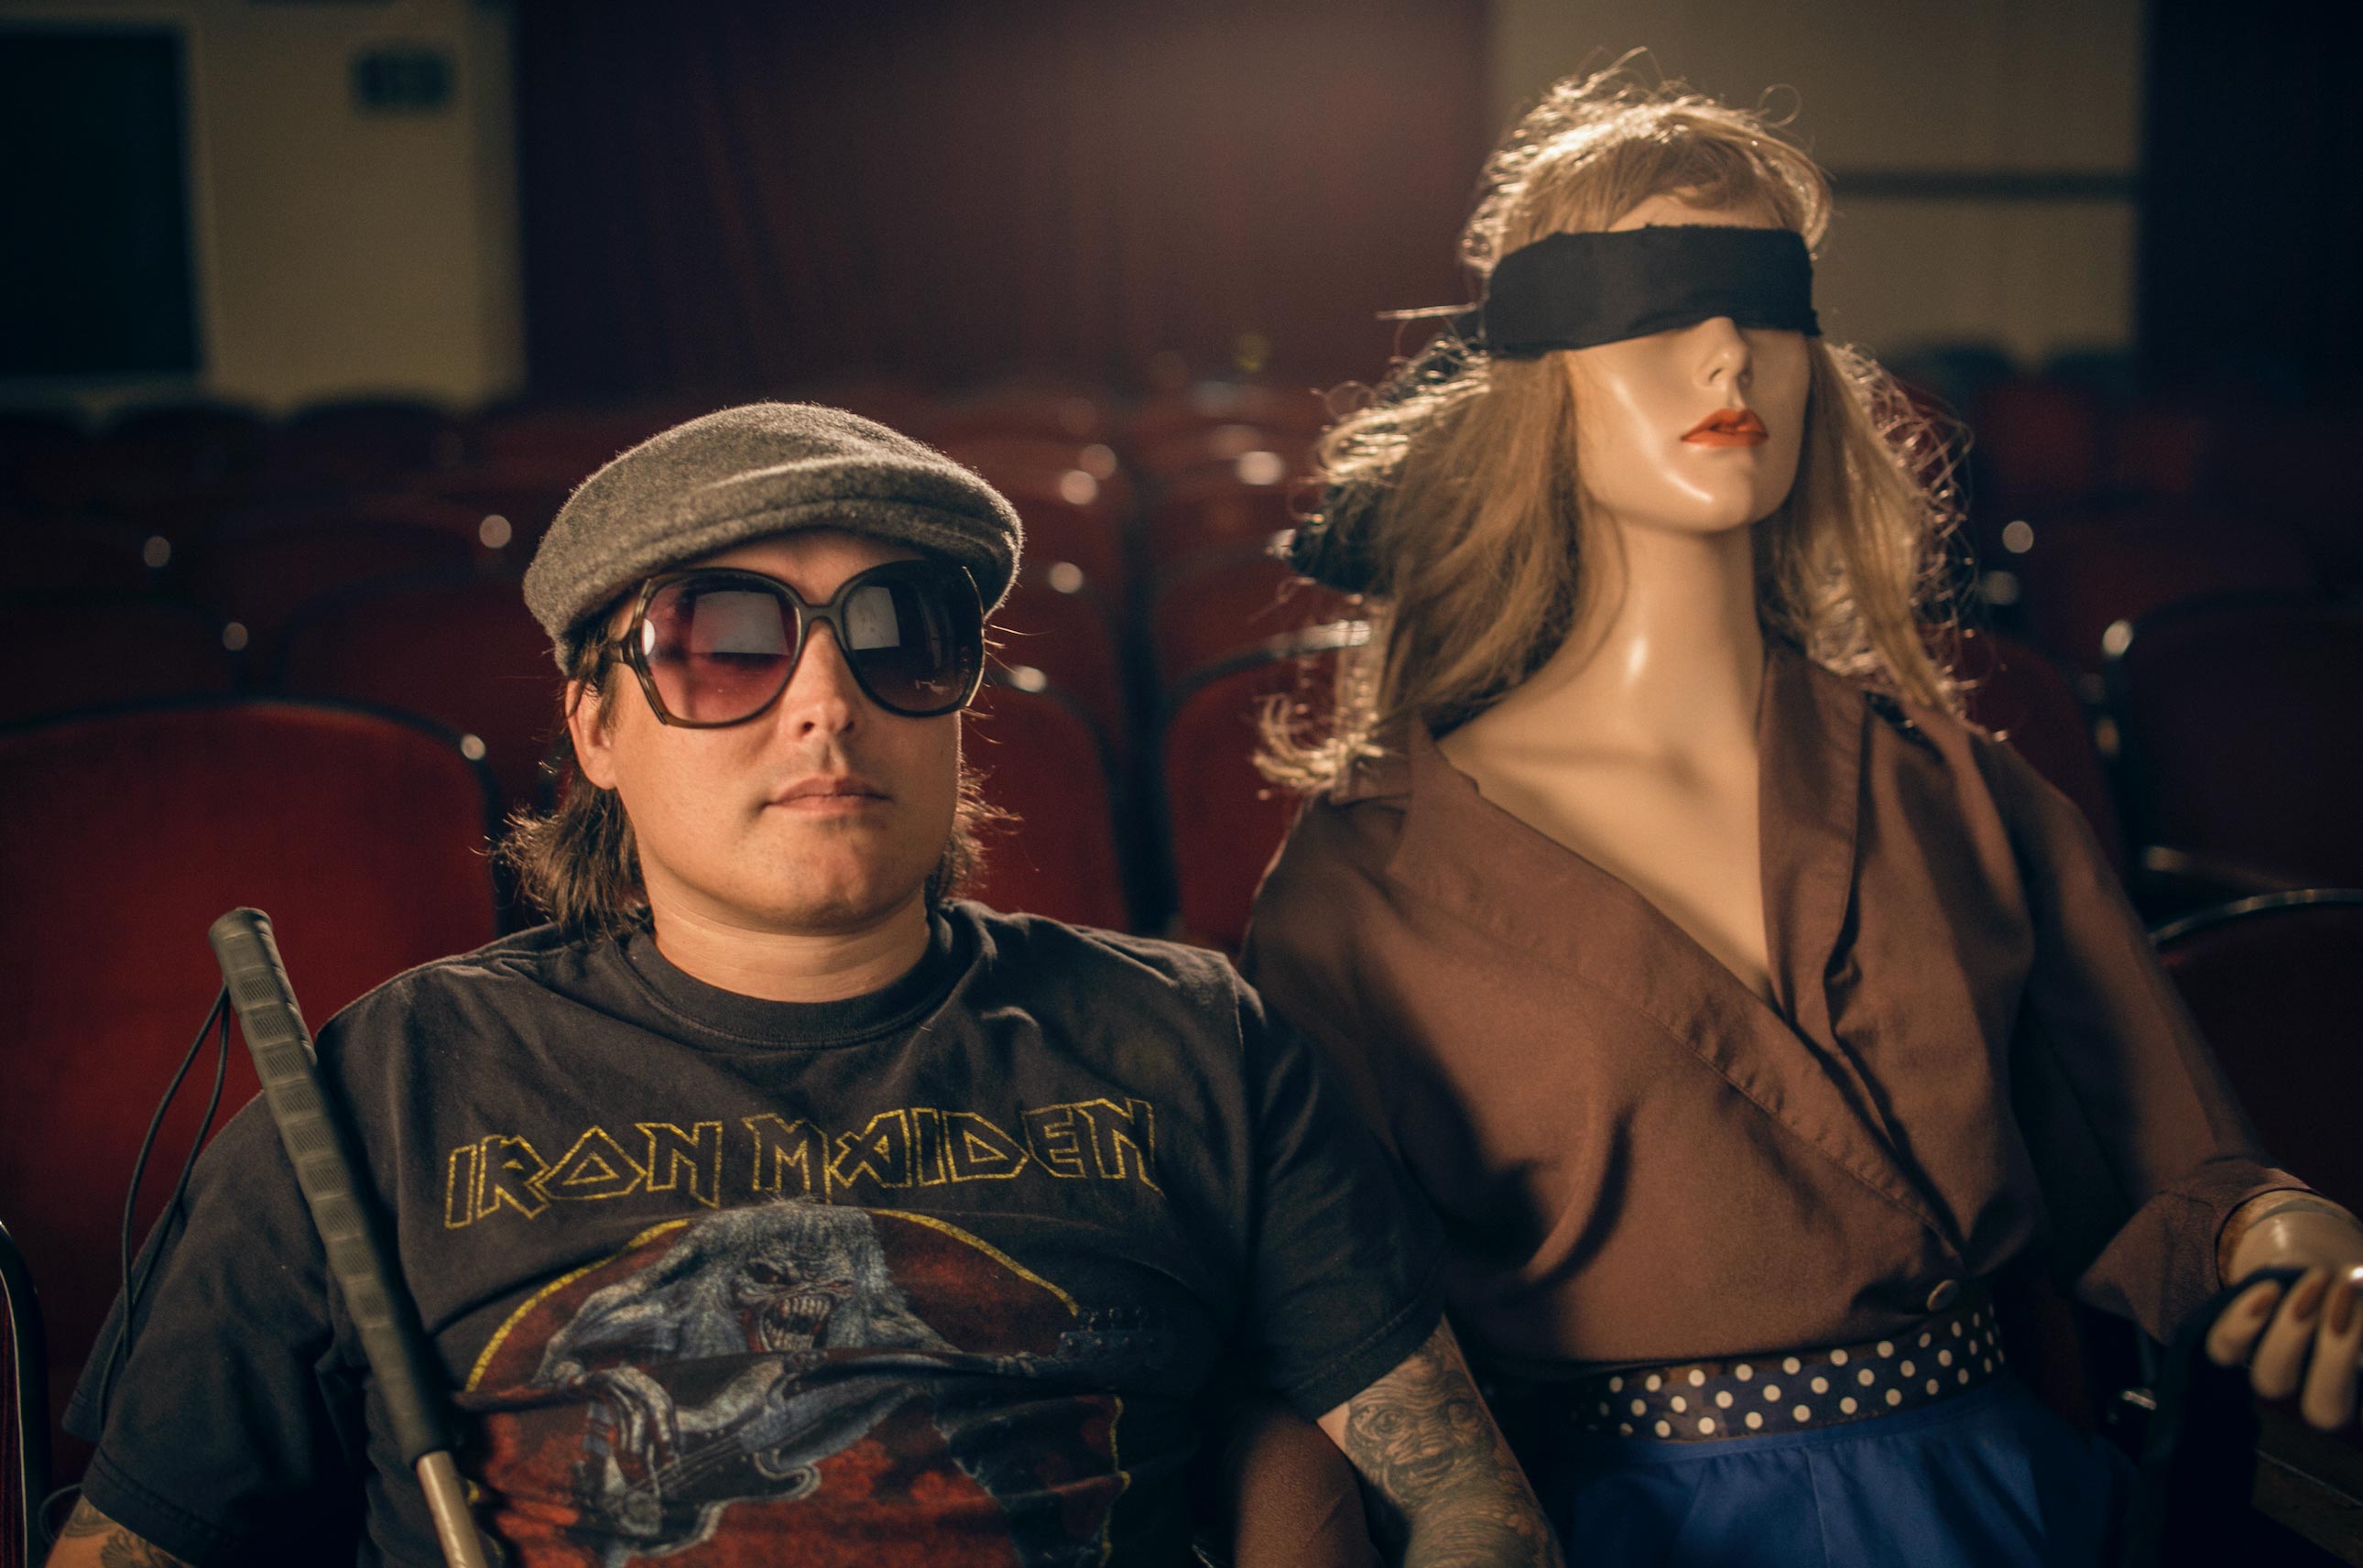 Brendan Patrick in an empty movie theater, with a blindfolded mannequin in the row behind him.